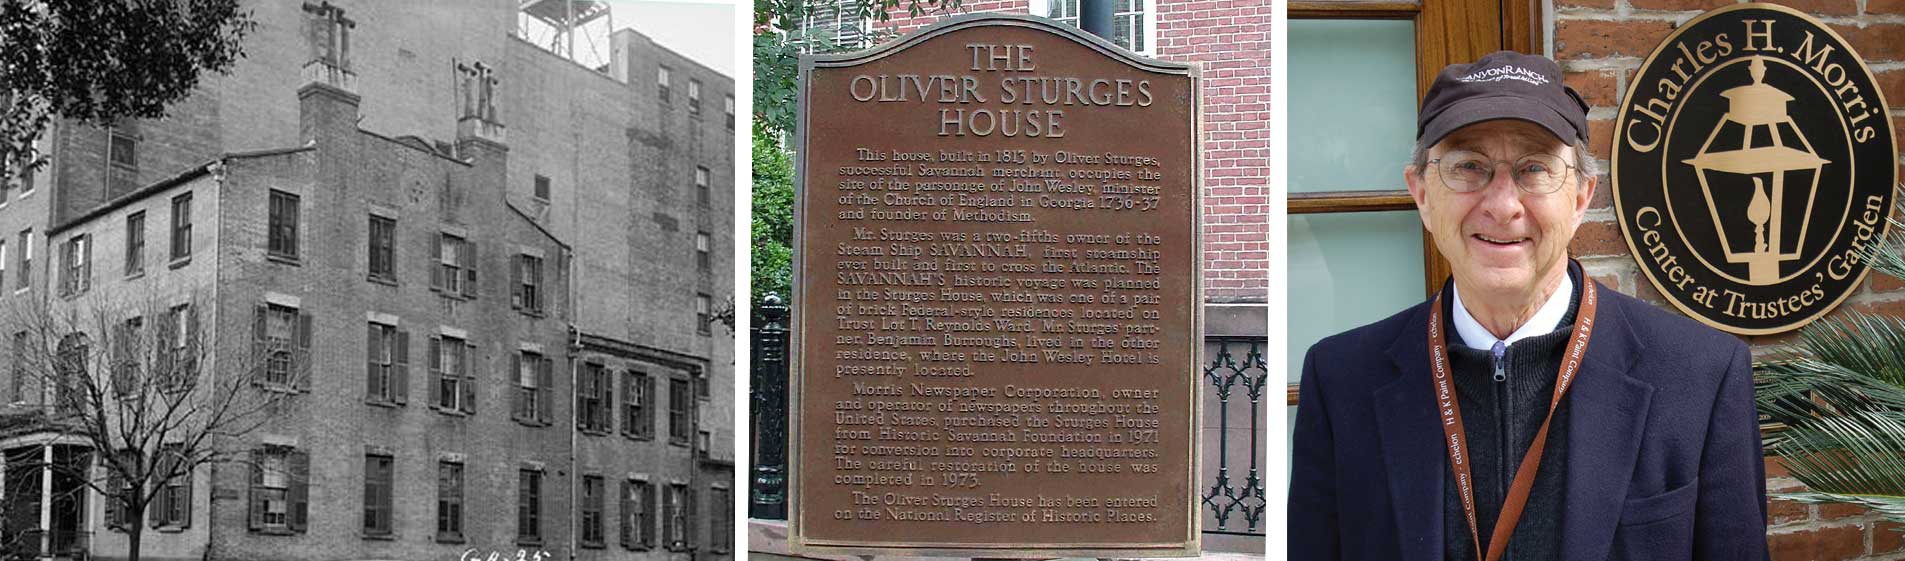 Mr. Charles H Morris and The Oliver Sturges House